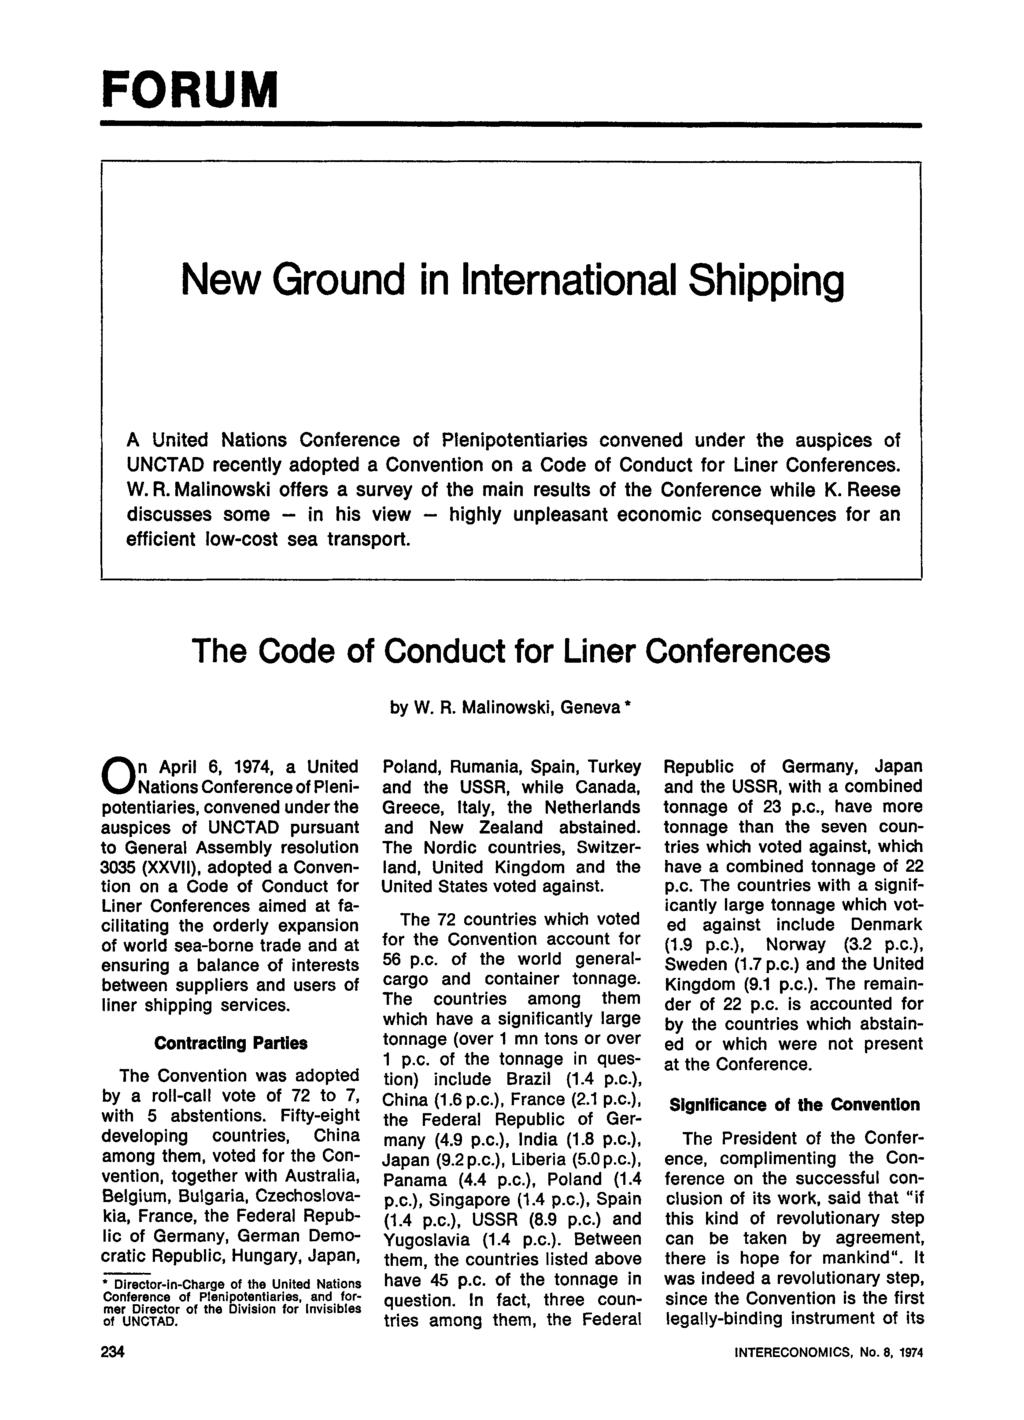 New Ground in International Shipping A United Nations Conference of Plenipotentiaries convened under the auspices of UNCTAD recently adopted a Convention on a Code of Conduct for Liner Conferences. W.